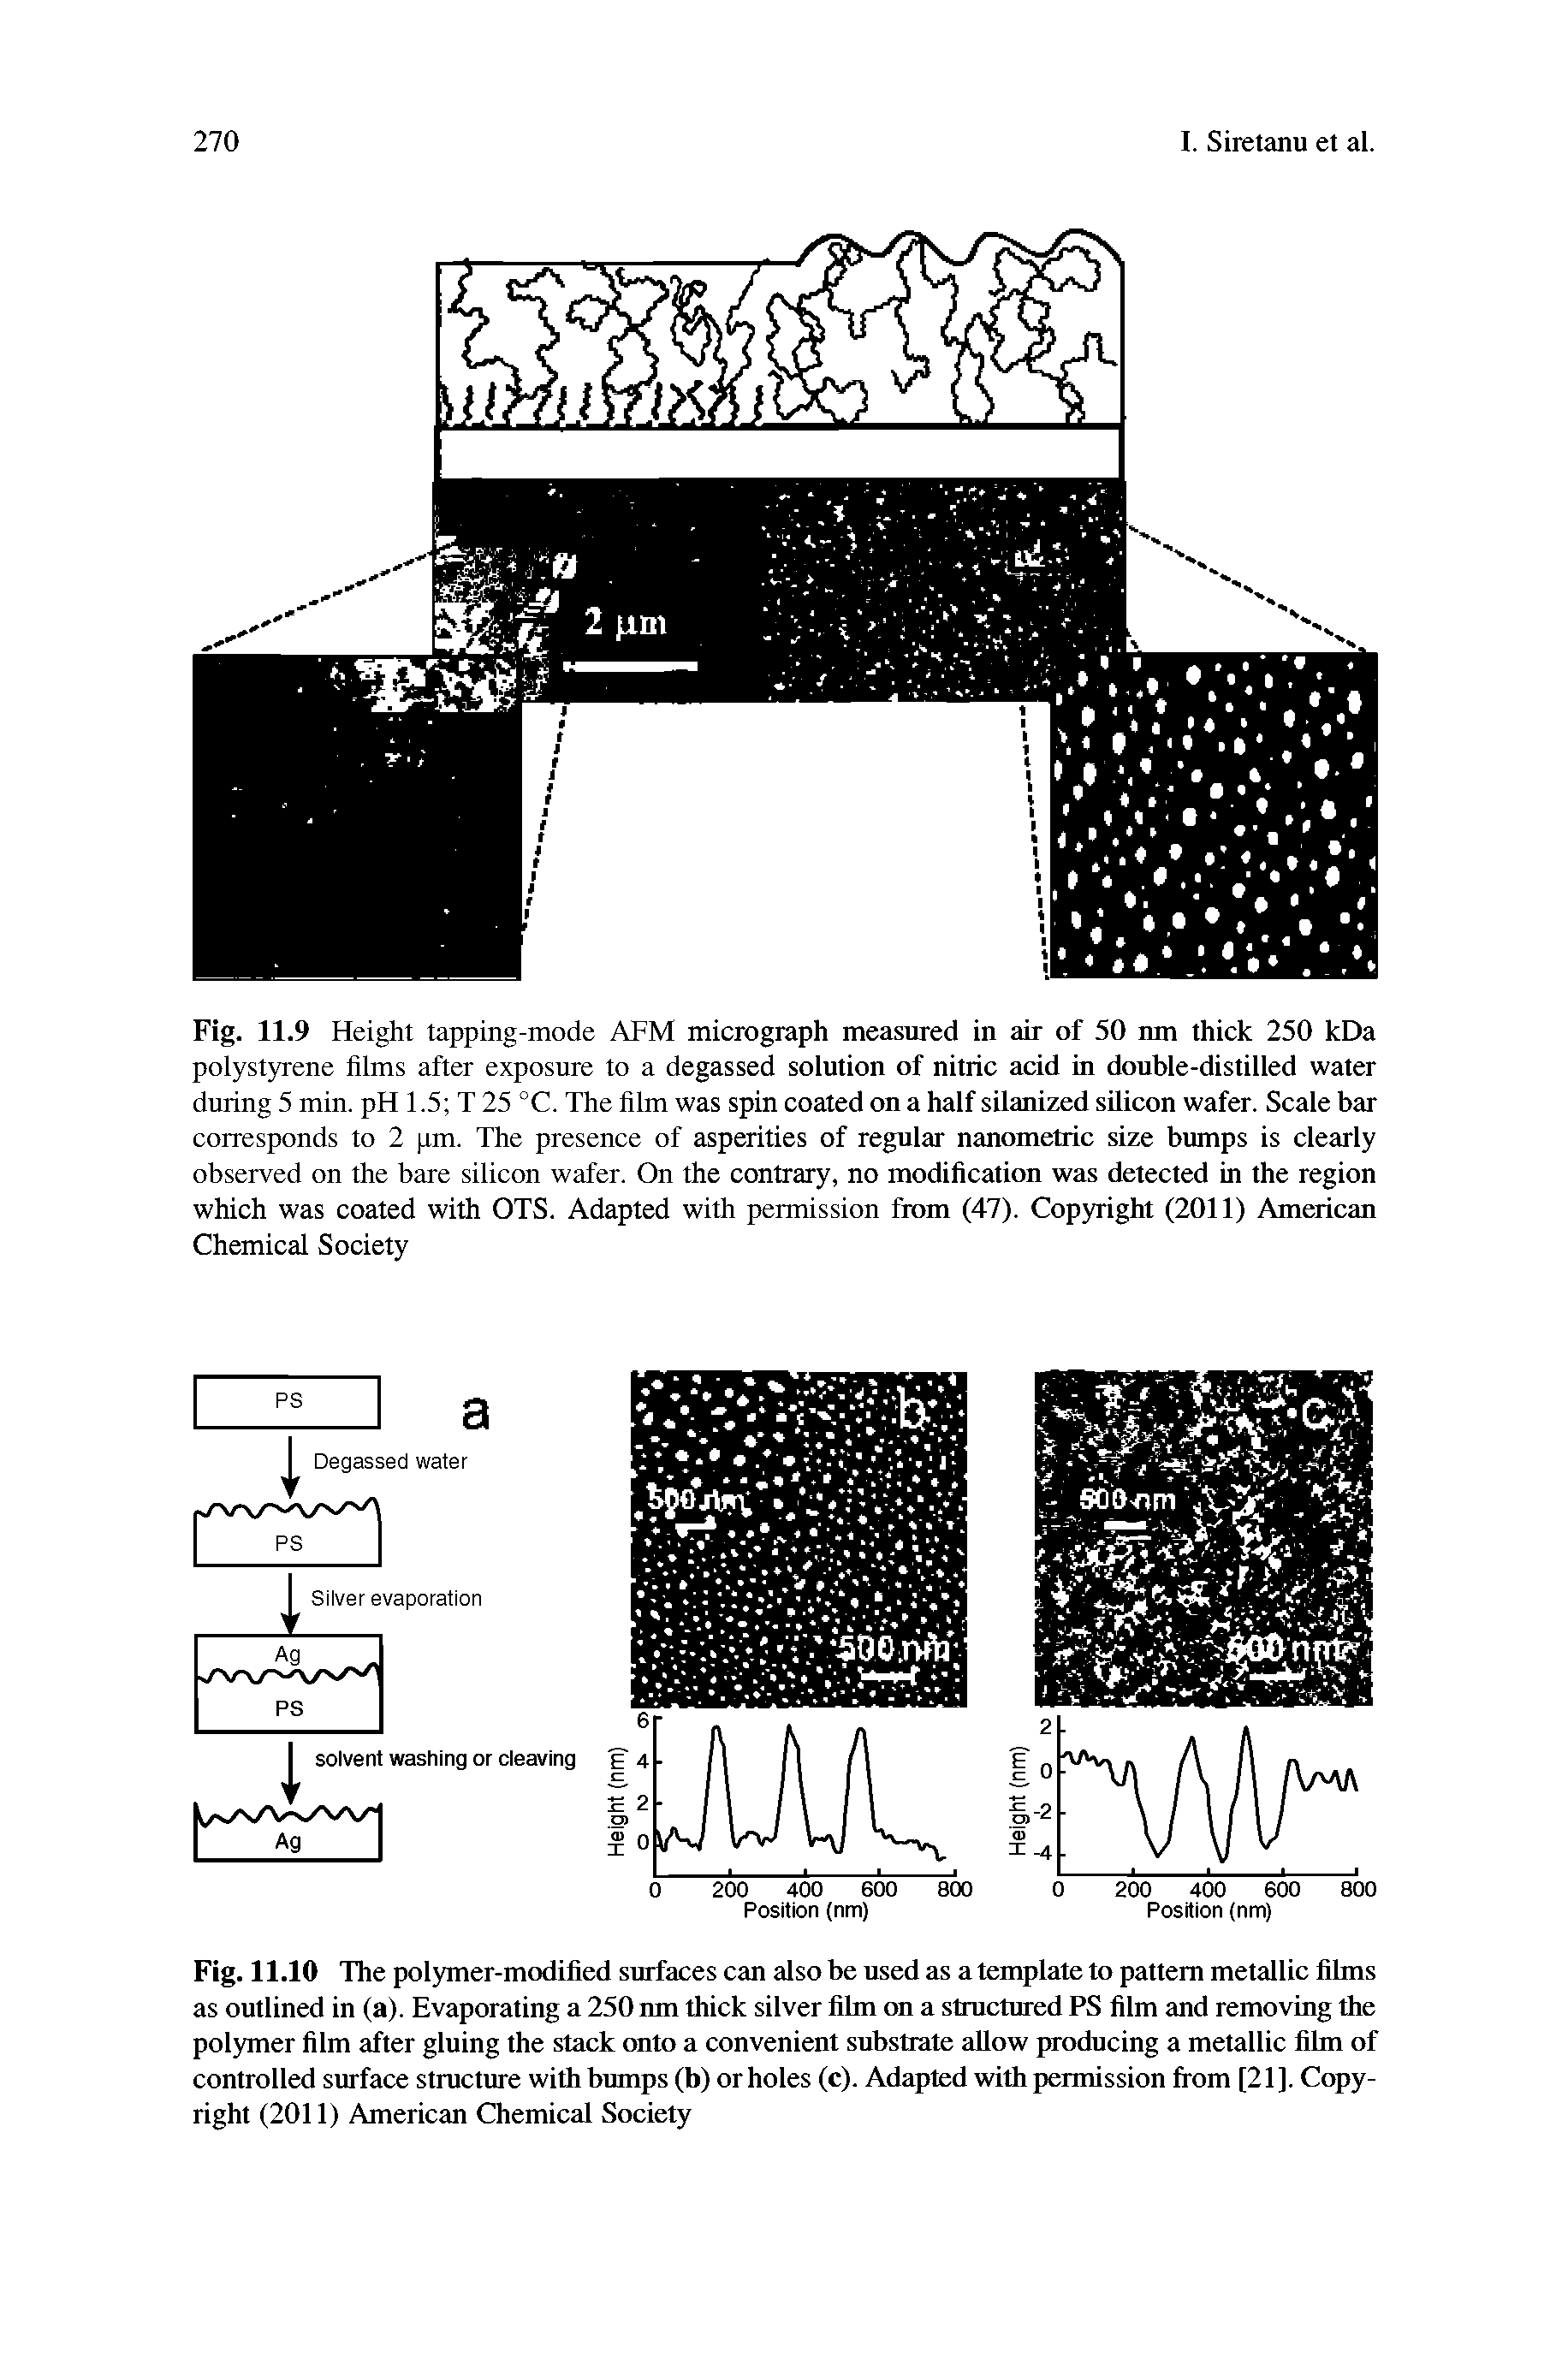 Fig. 11.10 The polymer-modified surfaces can also be used as a template to pattern metallic films as outlined in (a). Evaporating a 250 nm thick silver film on a structured PS film and removing the polymer film after gluing the stack onto a convenient substrate allow producing a metallic film of controlled surface structiue with bumps (b) or holes (c). Adapted with permission from [21]. Copyright (2011) American Chemical Society...